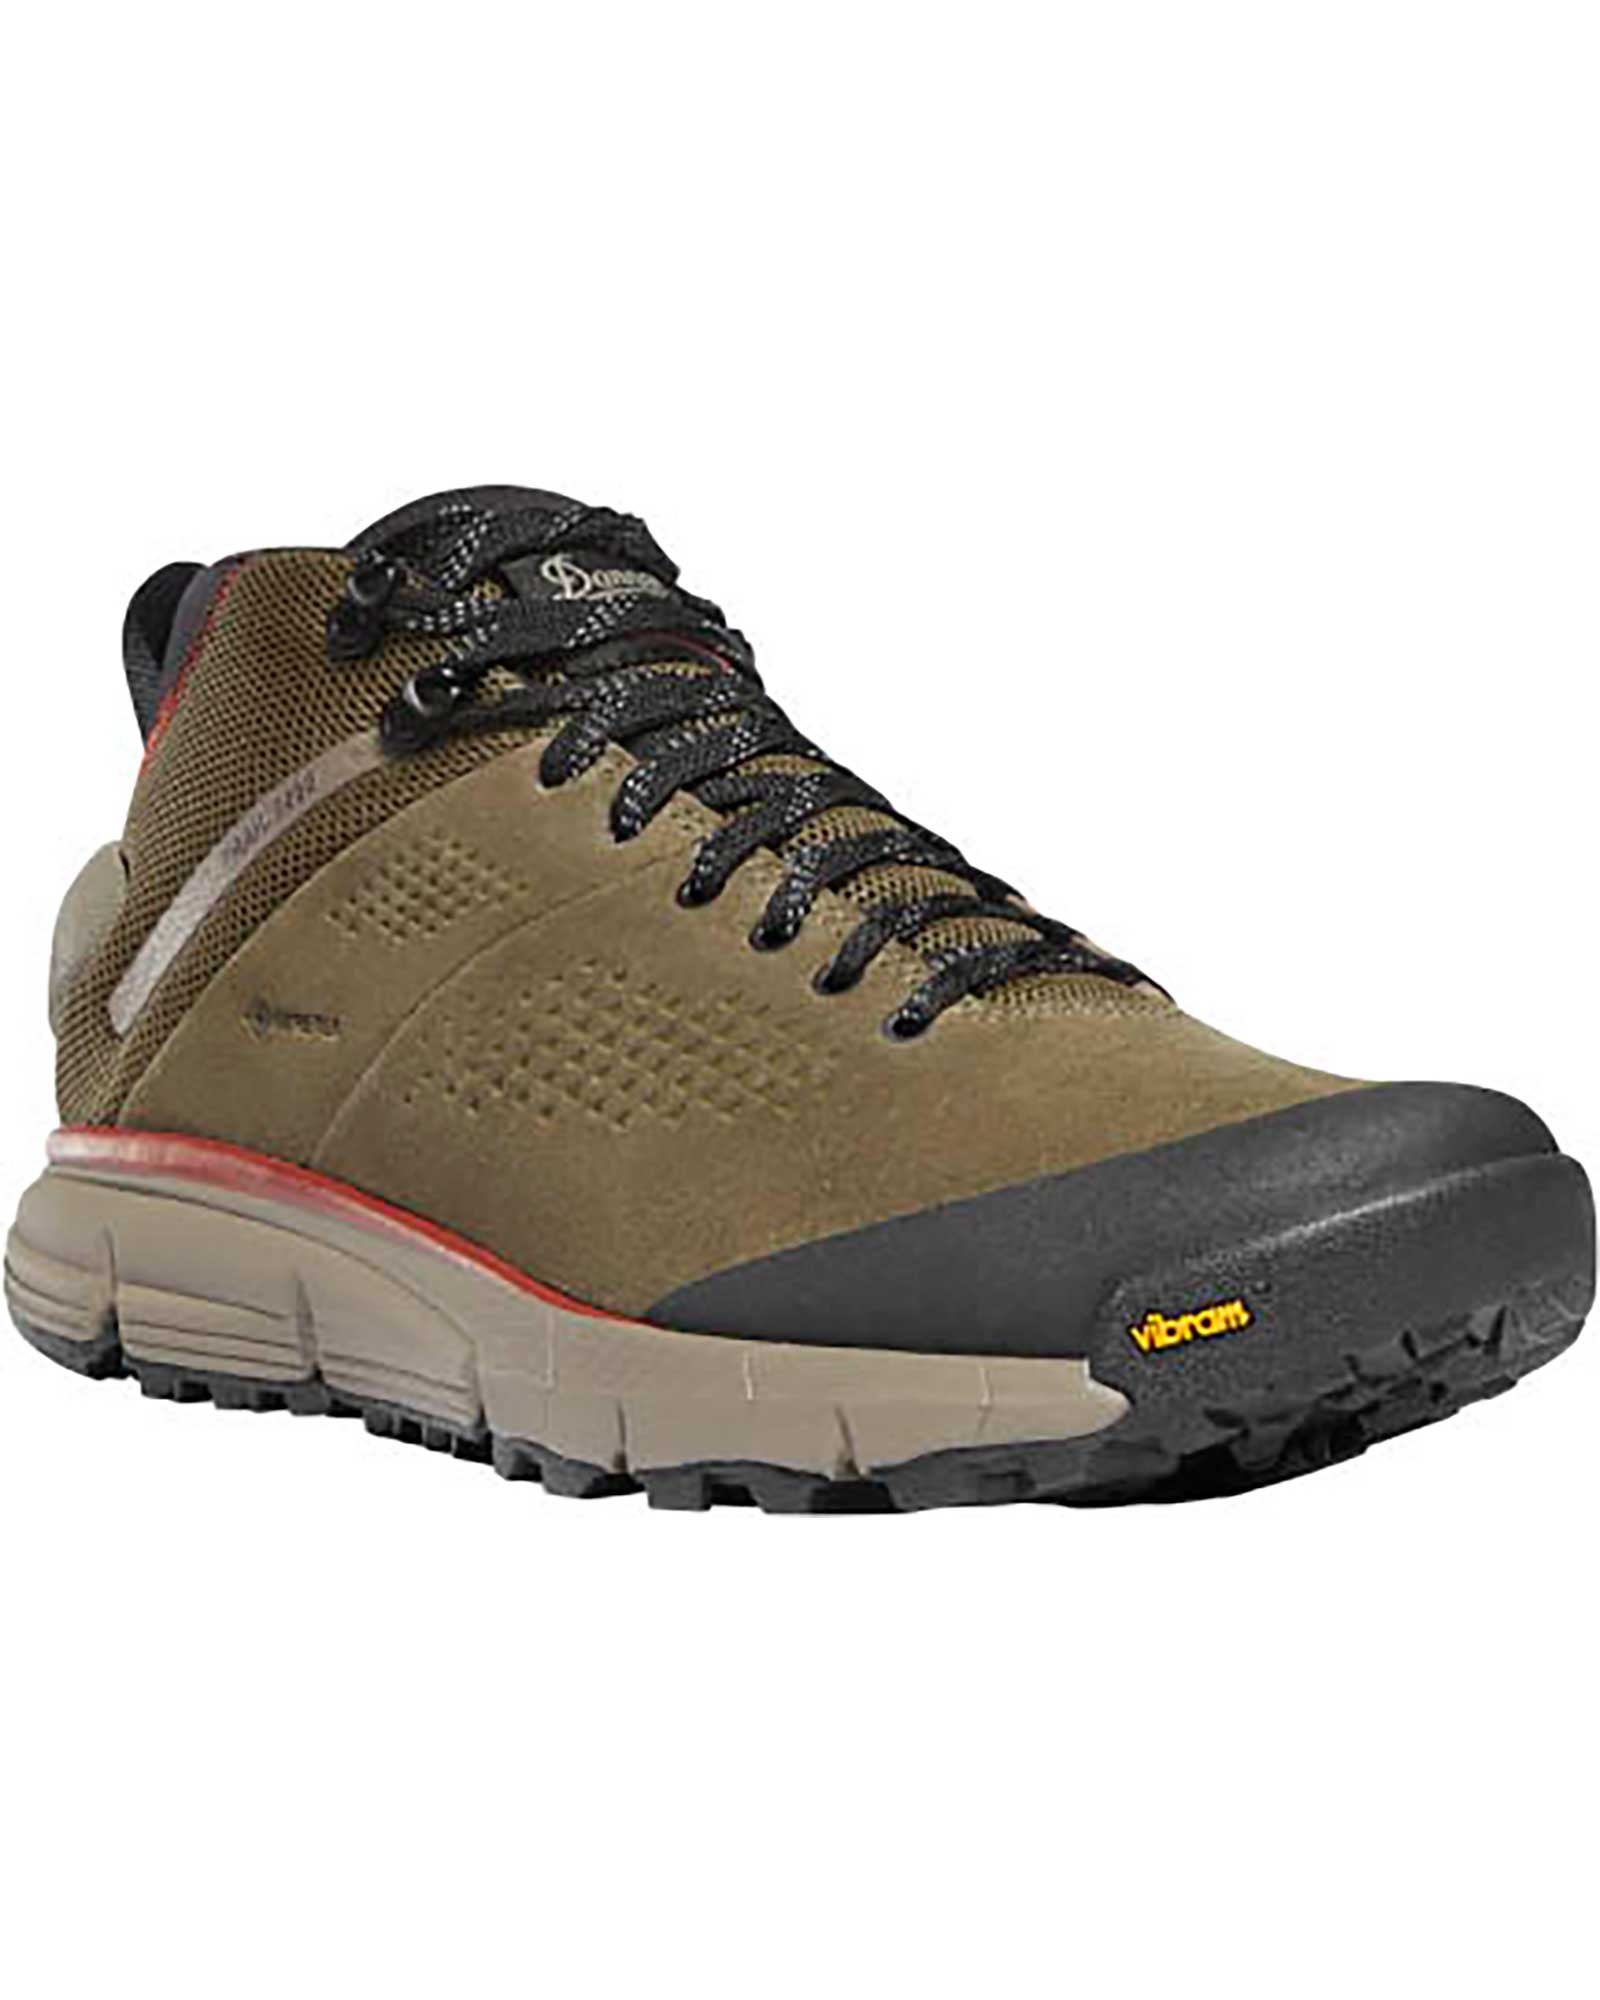 Danner Men’s Trail 2650 Mid GORE TEX Boots - Dusty Olive UK 9